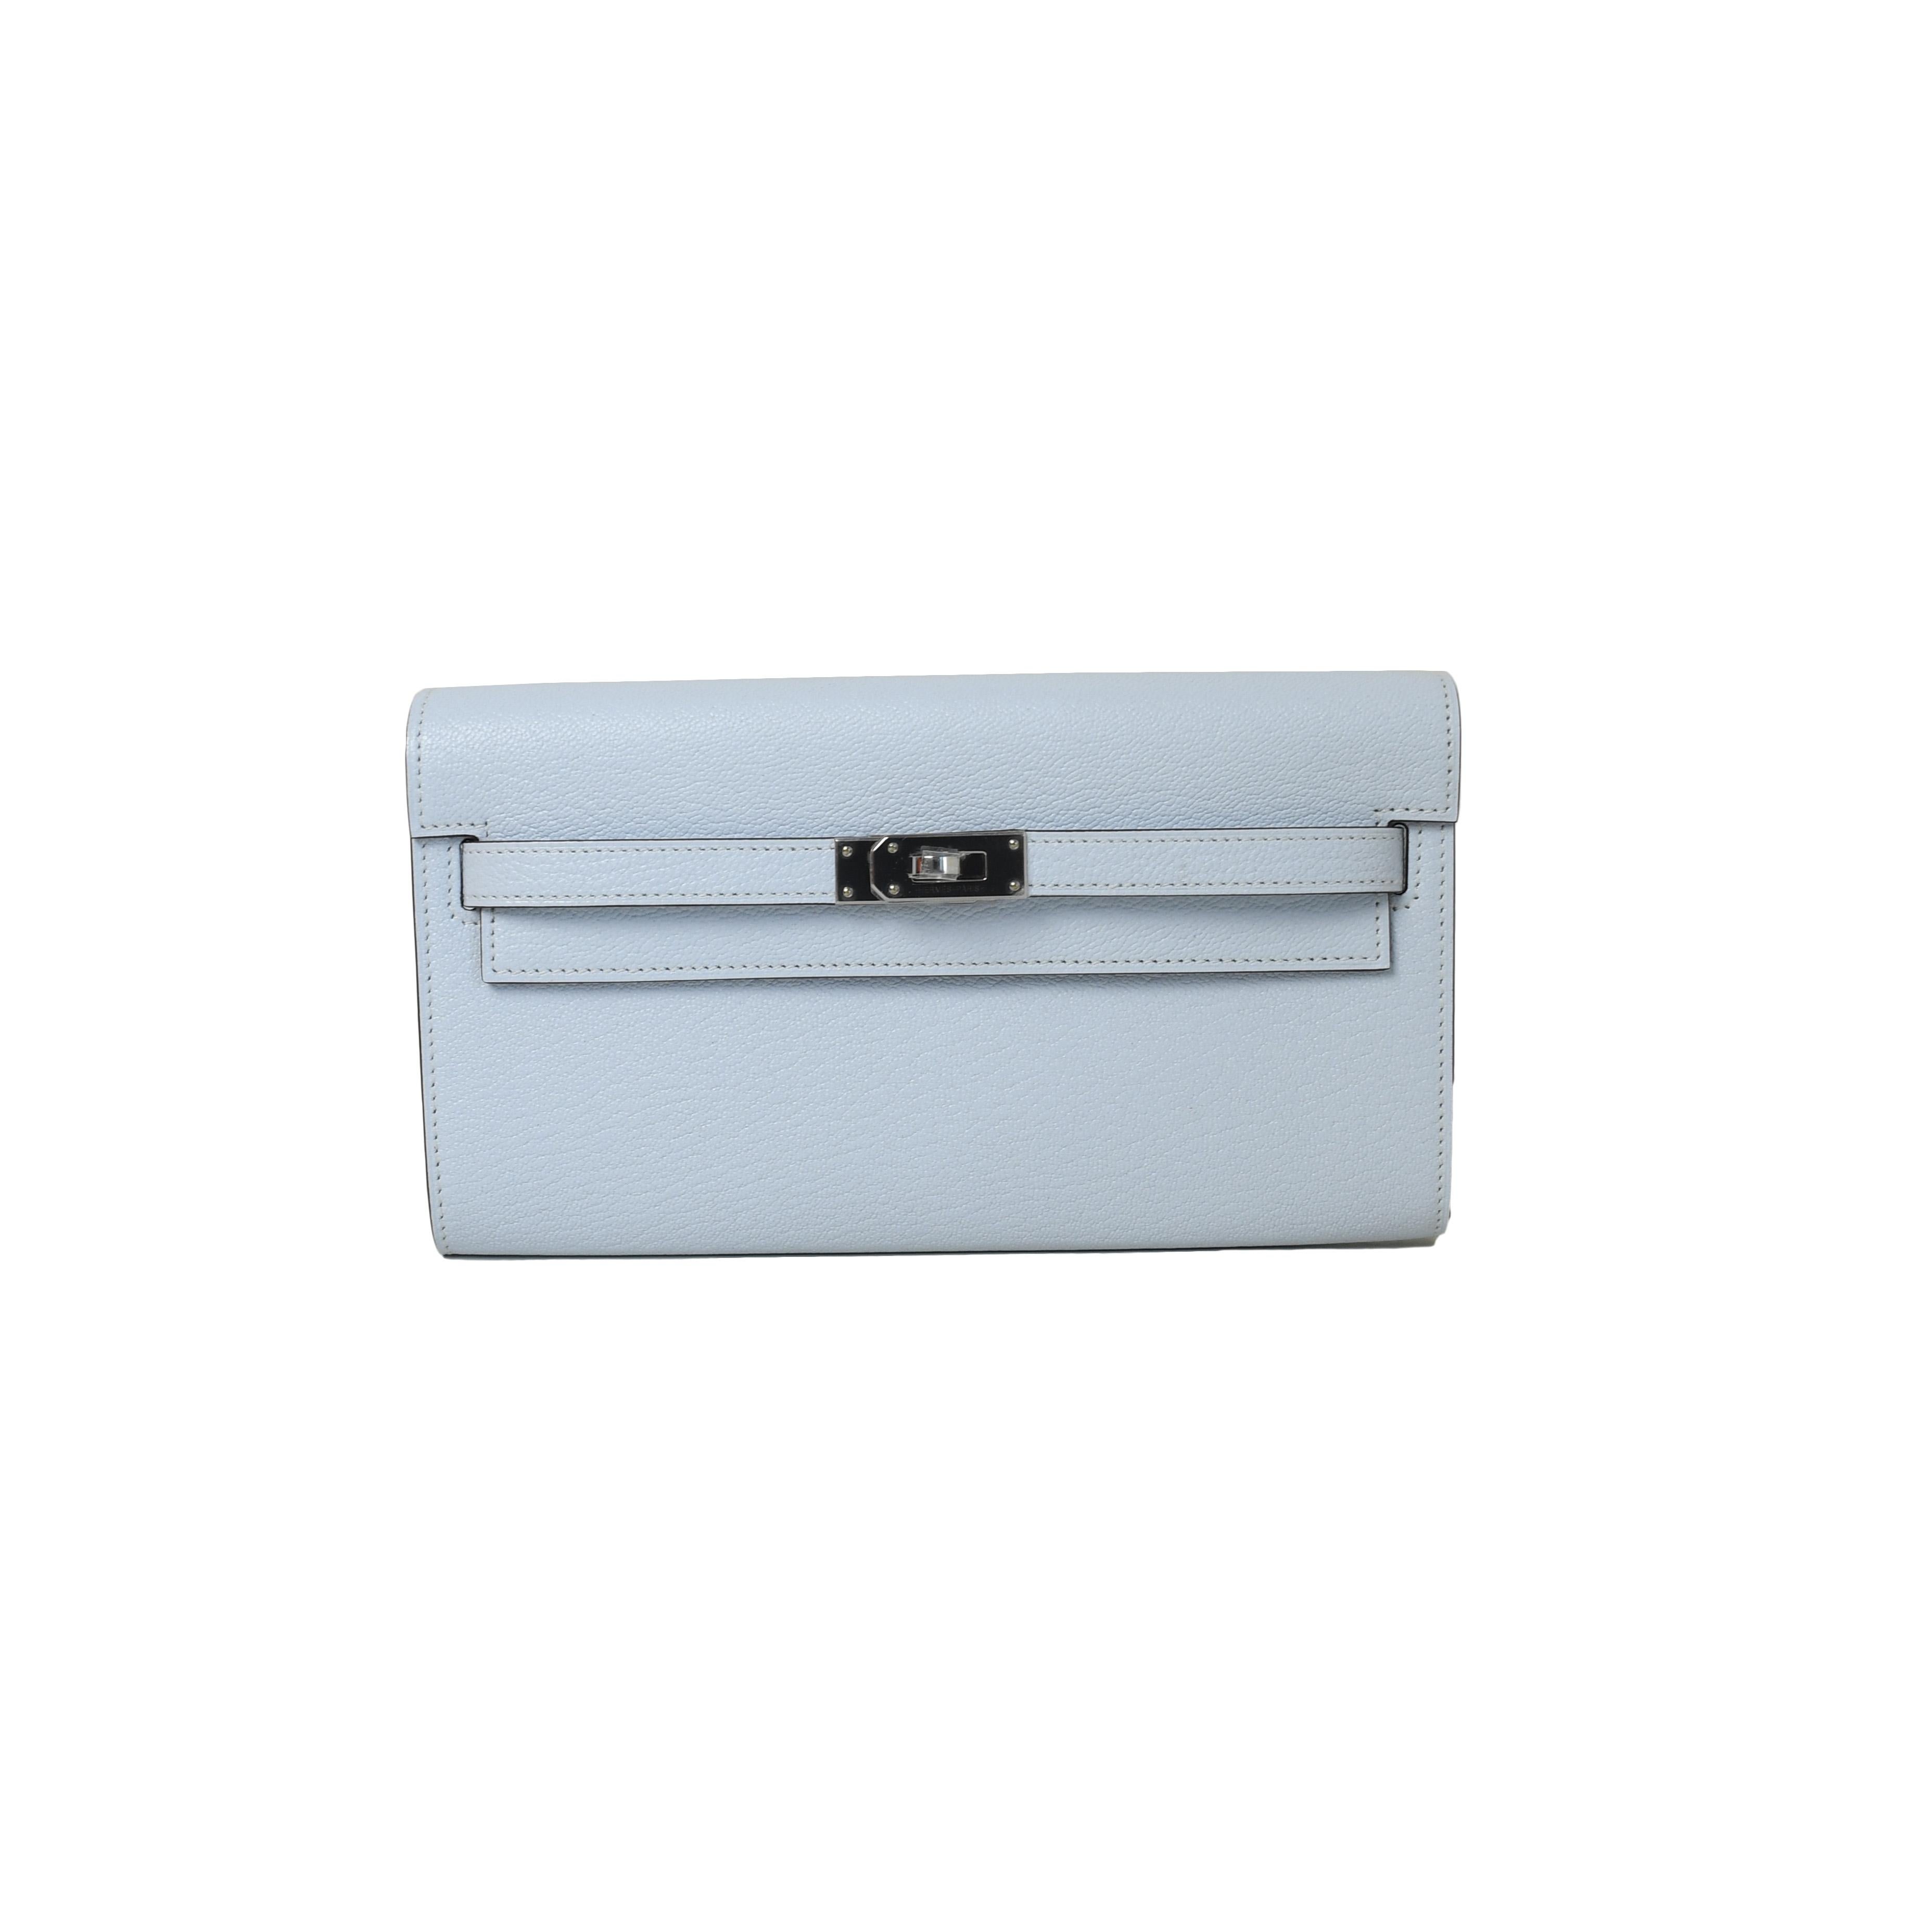 Hermes Kelly To Go Mysore Palladium Hardware Bleu Brume In New Condition For Sale In Flushing, NY